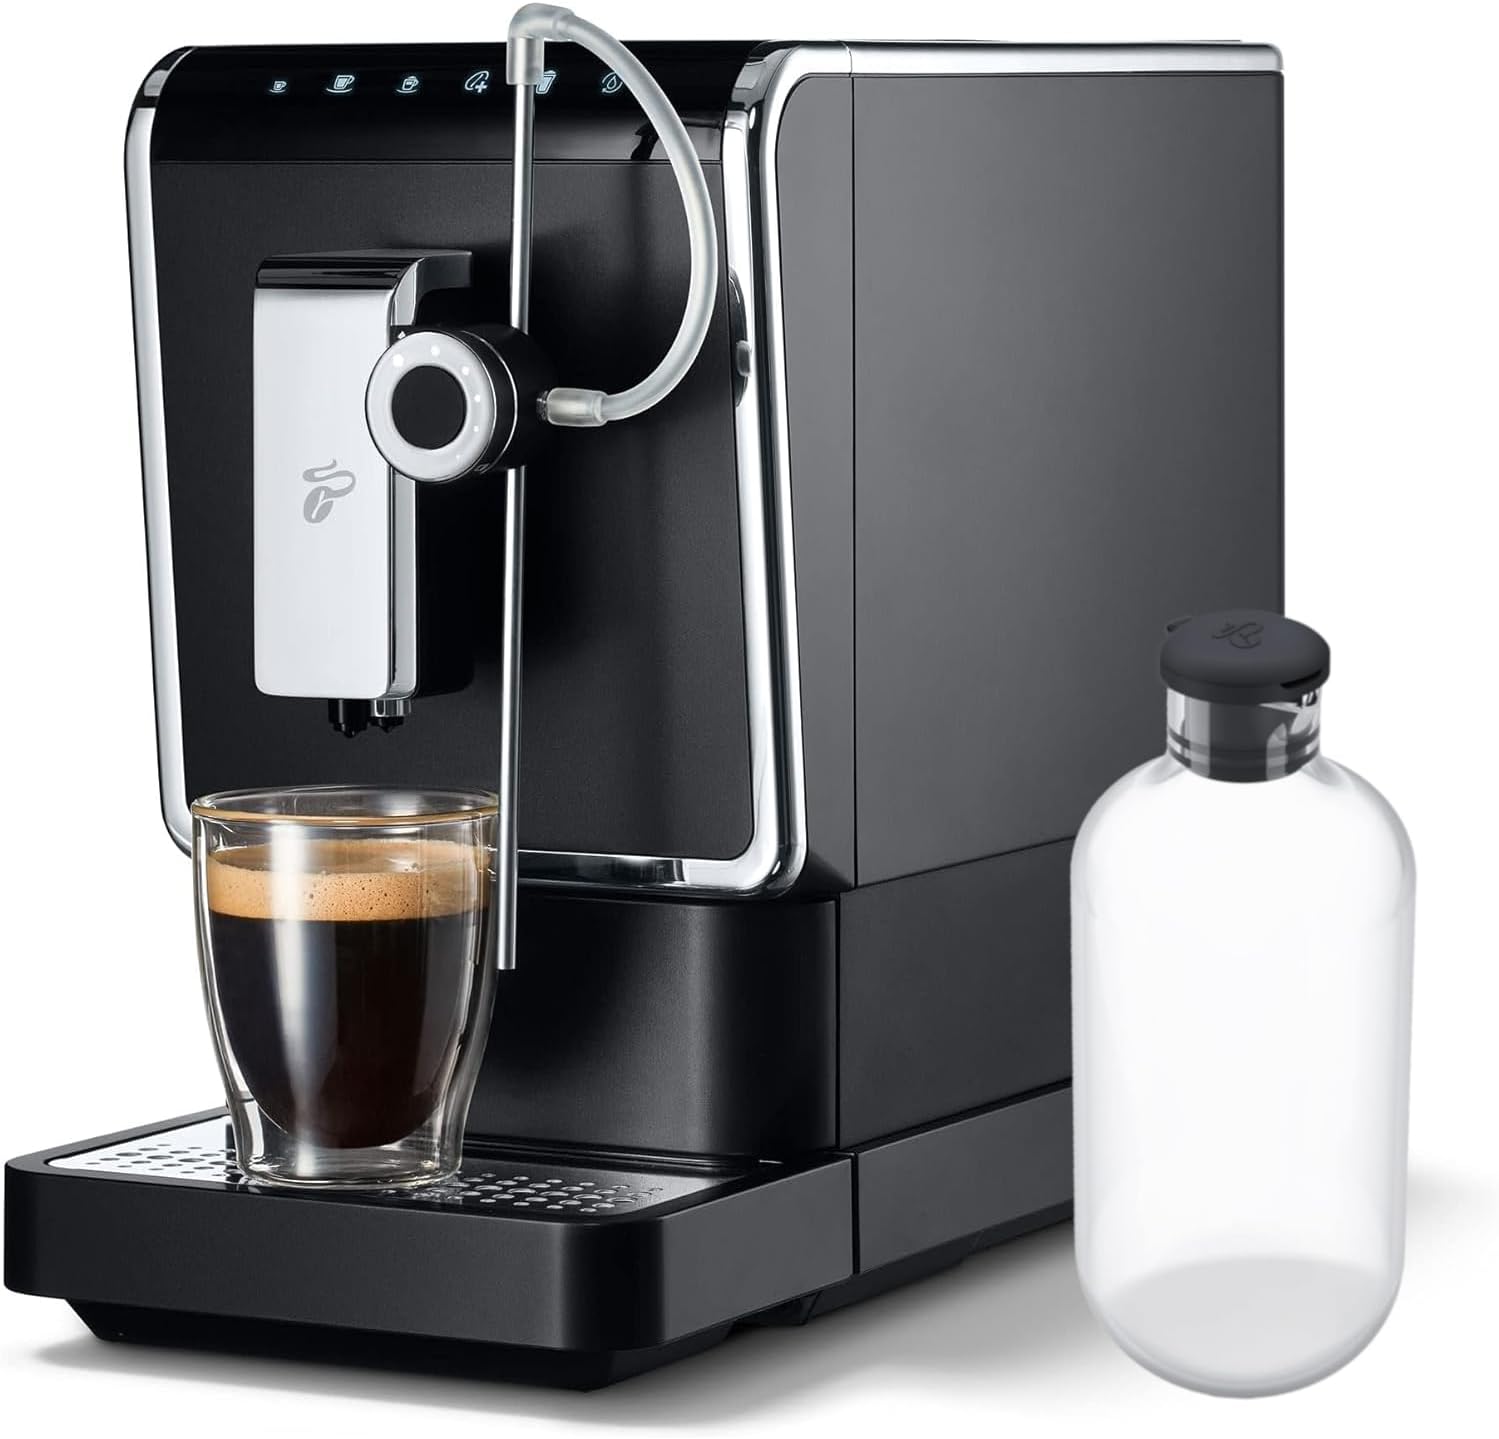 Tchibo Esperto Pro Fully Automatic Coffee Machine with Matching Glass Milk Carafe Perfect Coffee Enjoyment for Caffè Crema, Espresso and Milk Specialities, 600 ml Milk Container, Anthracite